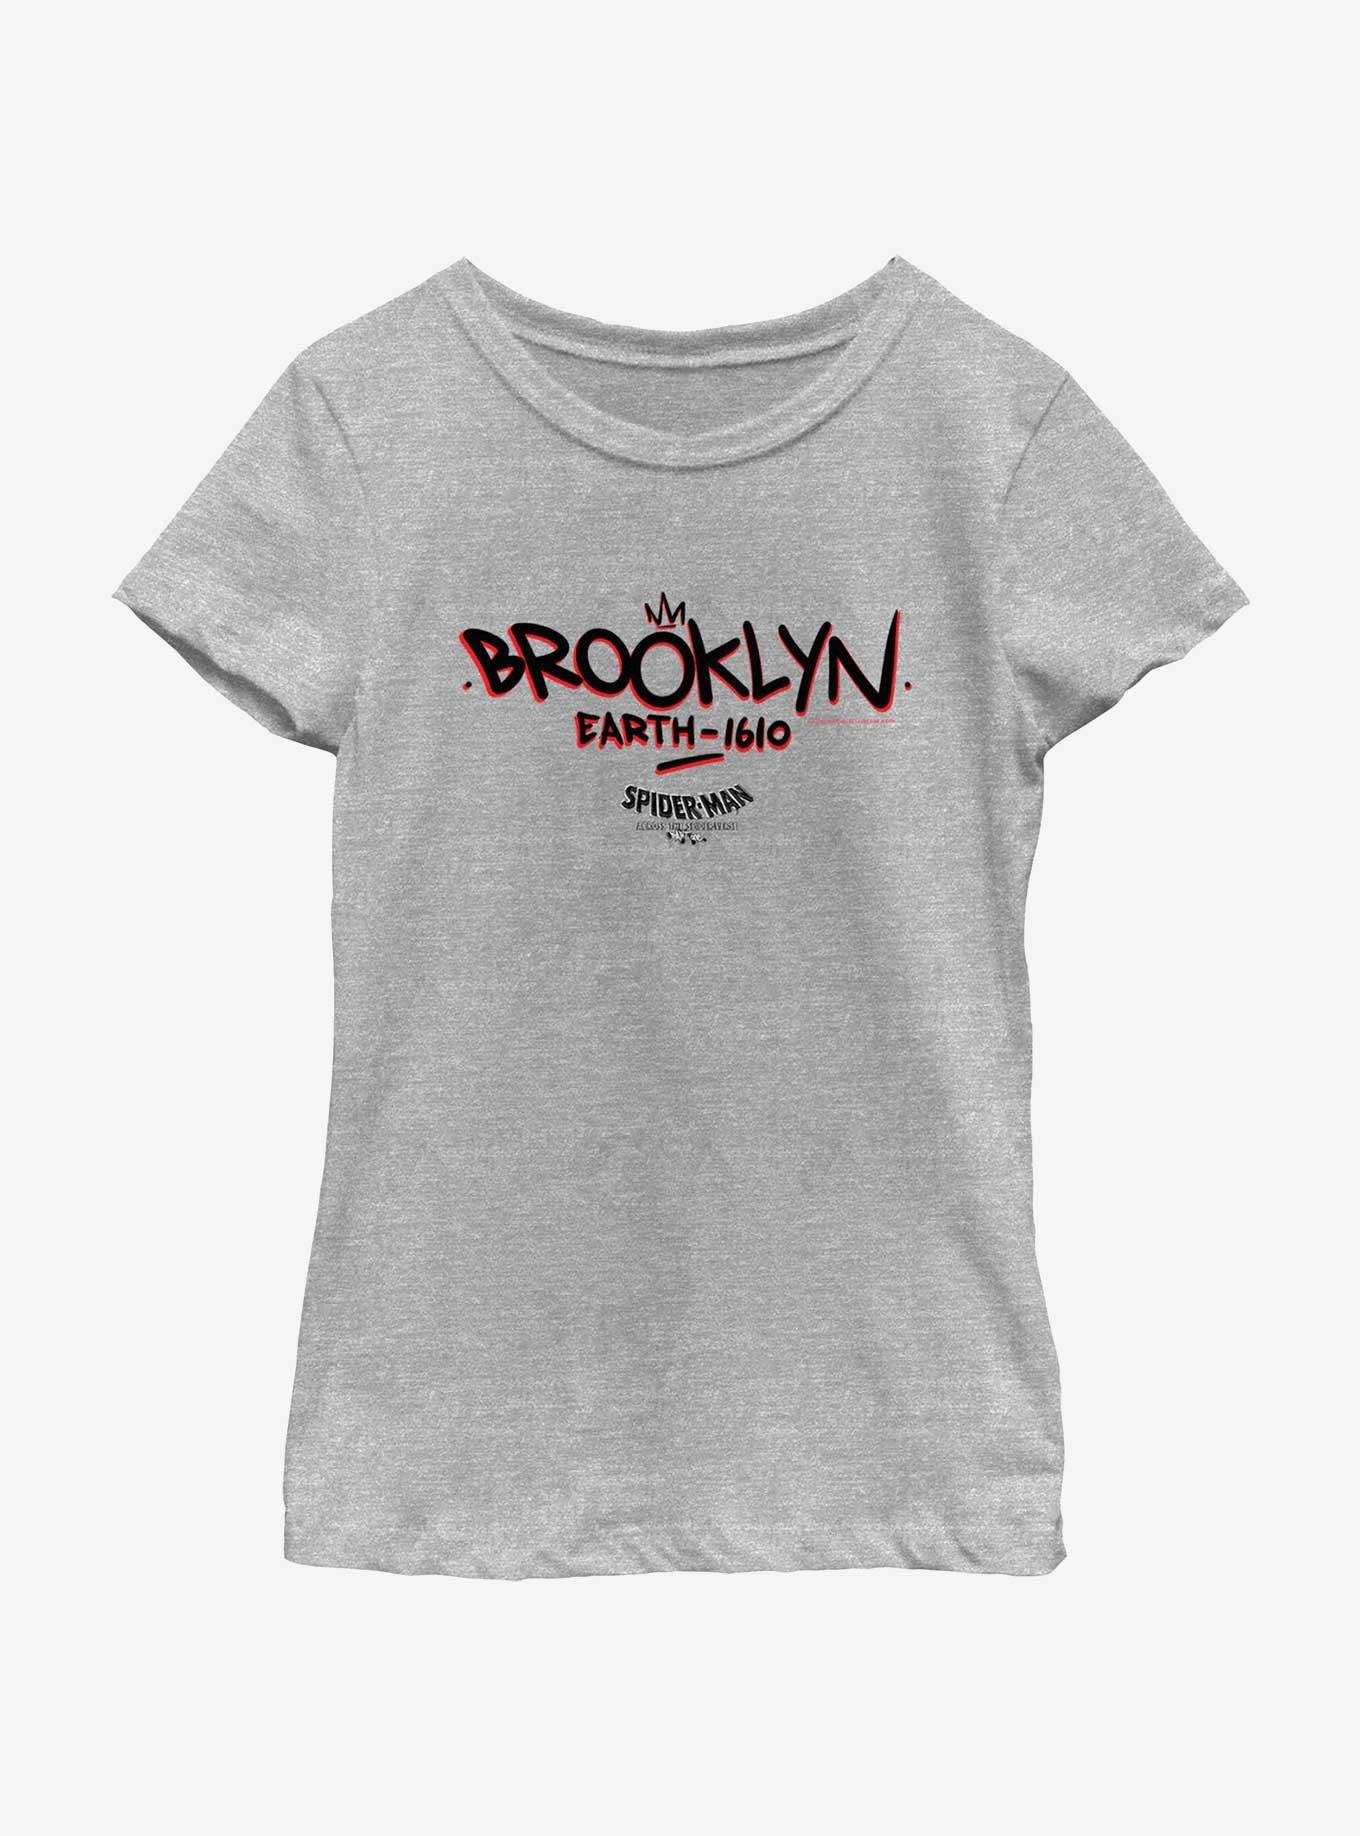 Marvel Spider-Man: Across The Spider-Verse Brooklyn Earth-1610 Youth Girls T-Shirt, ATH HTR, hi-res